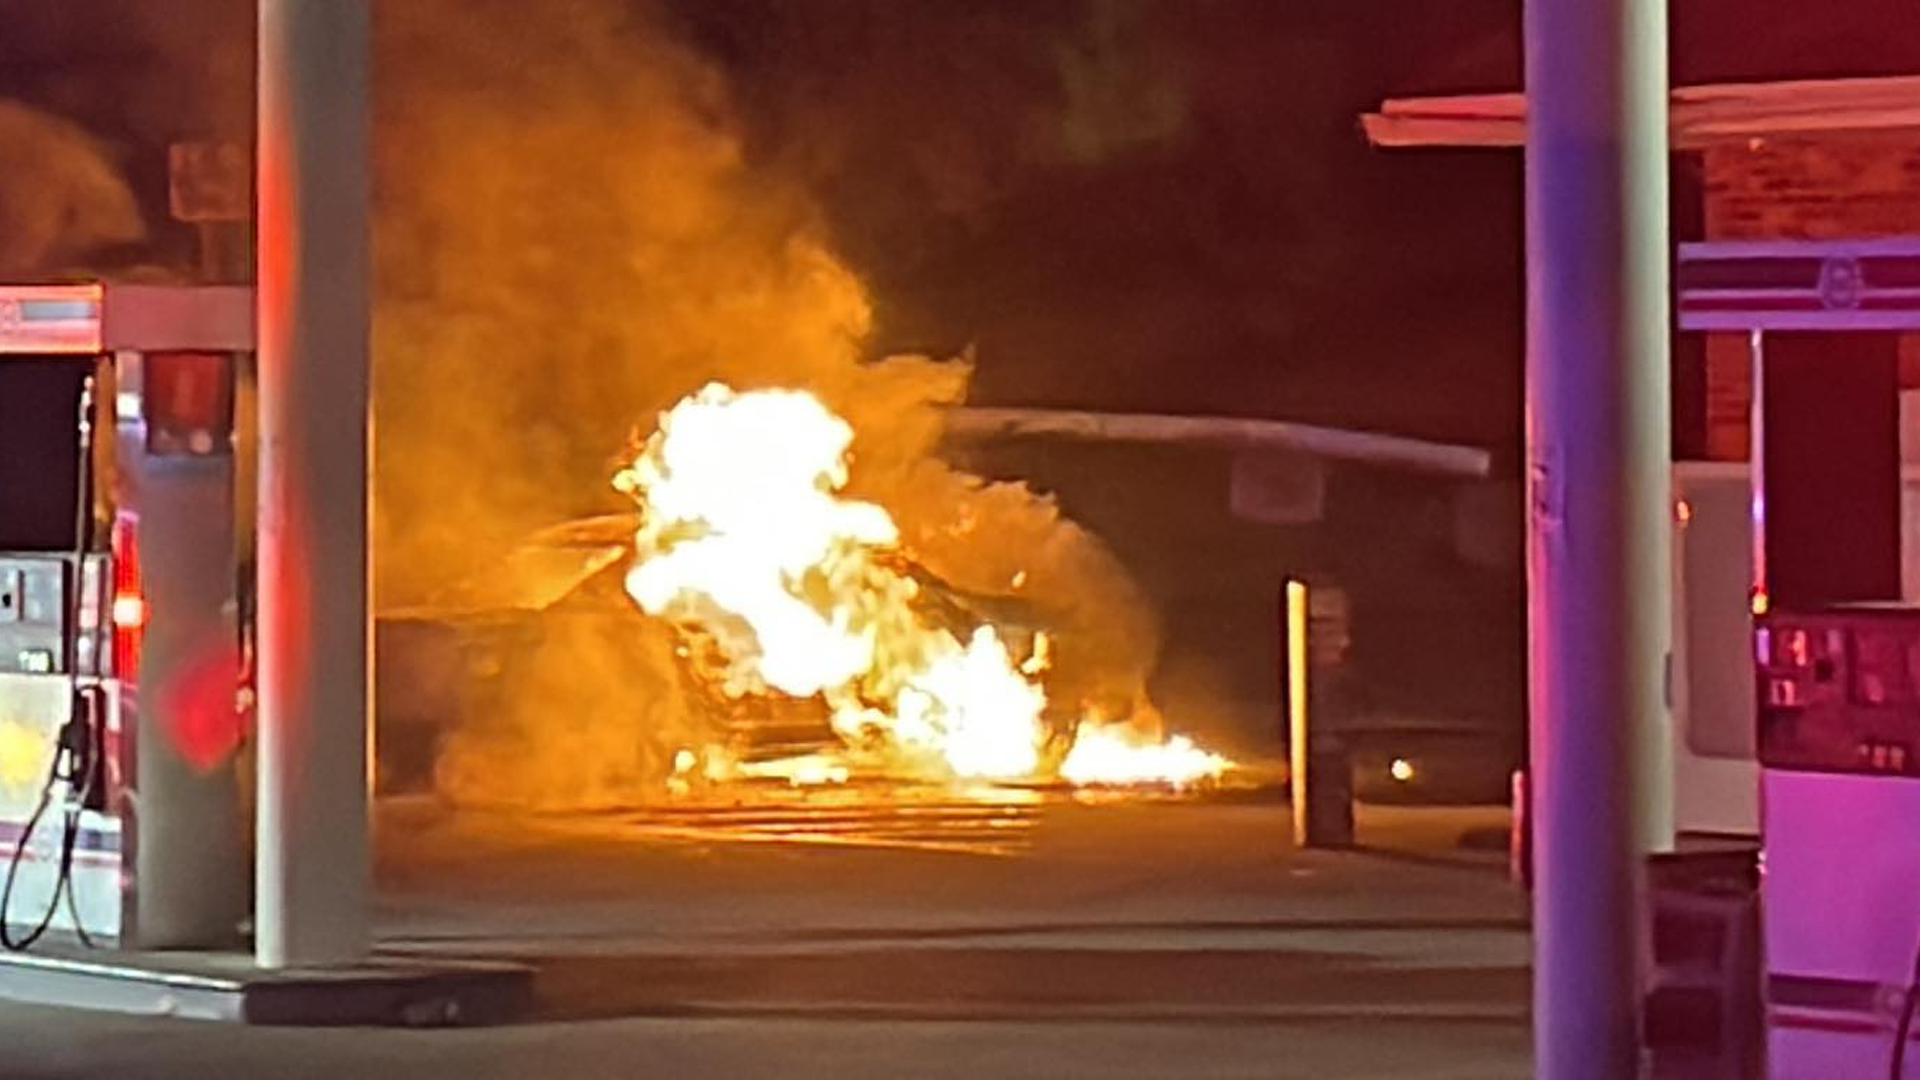 Investigation underway after van bursts into flames outside Saugus